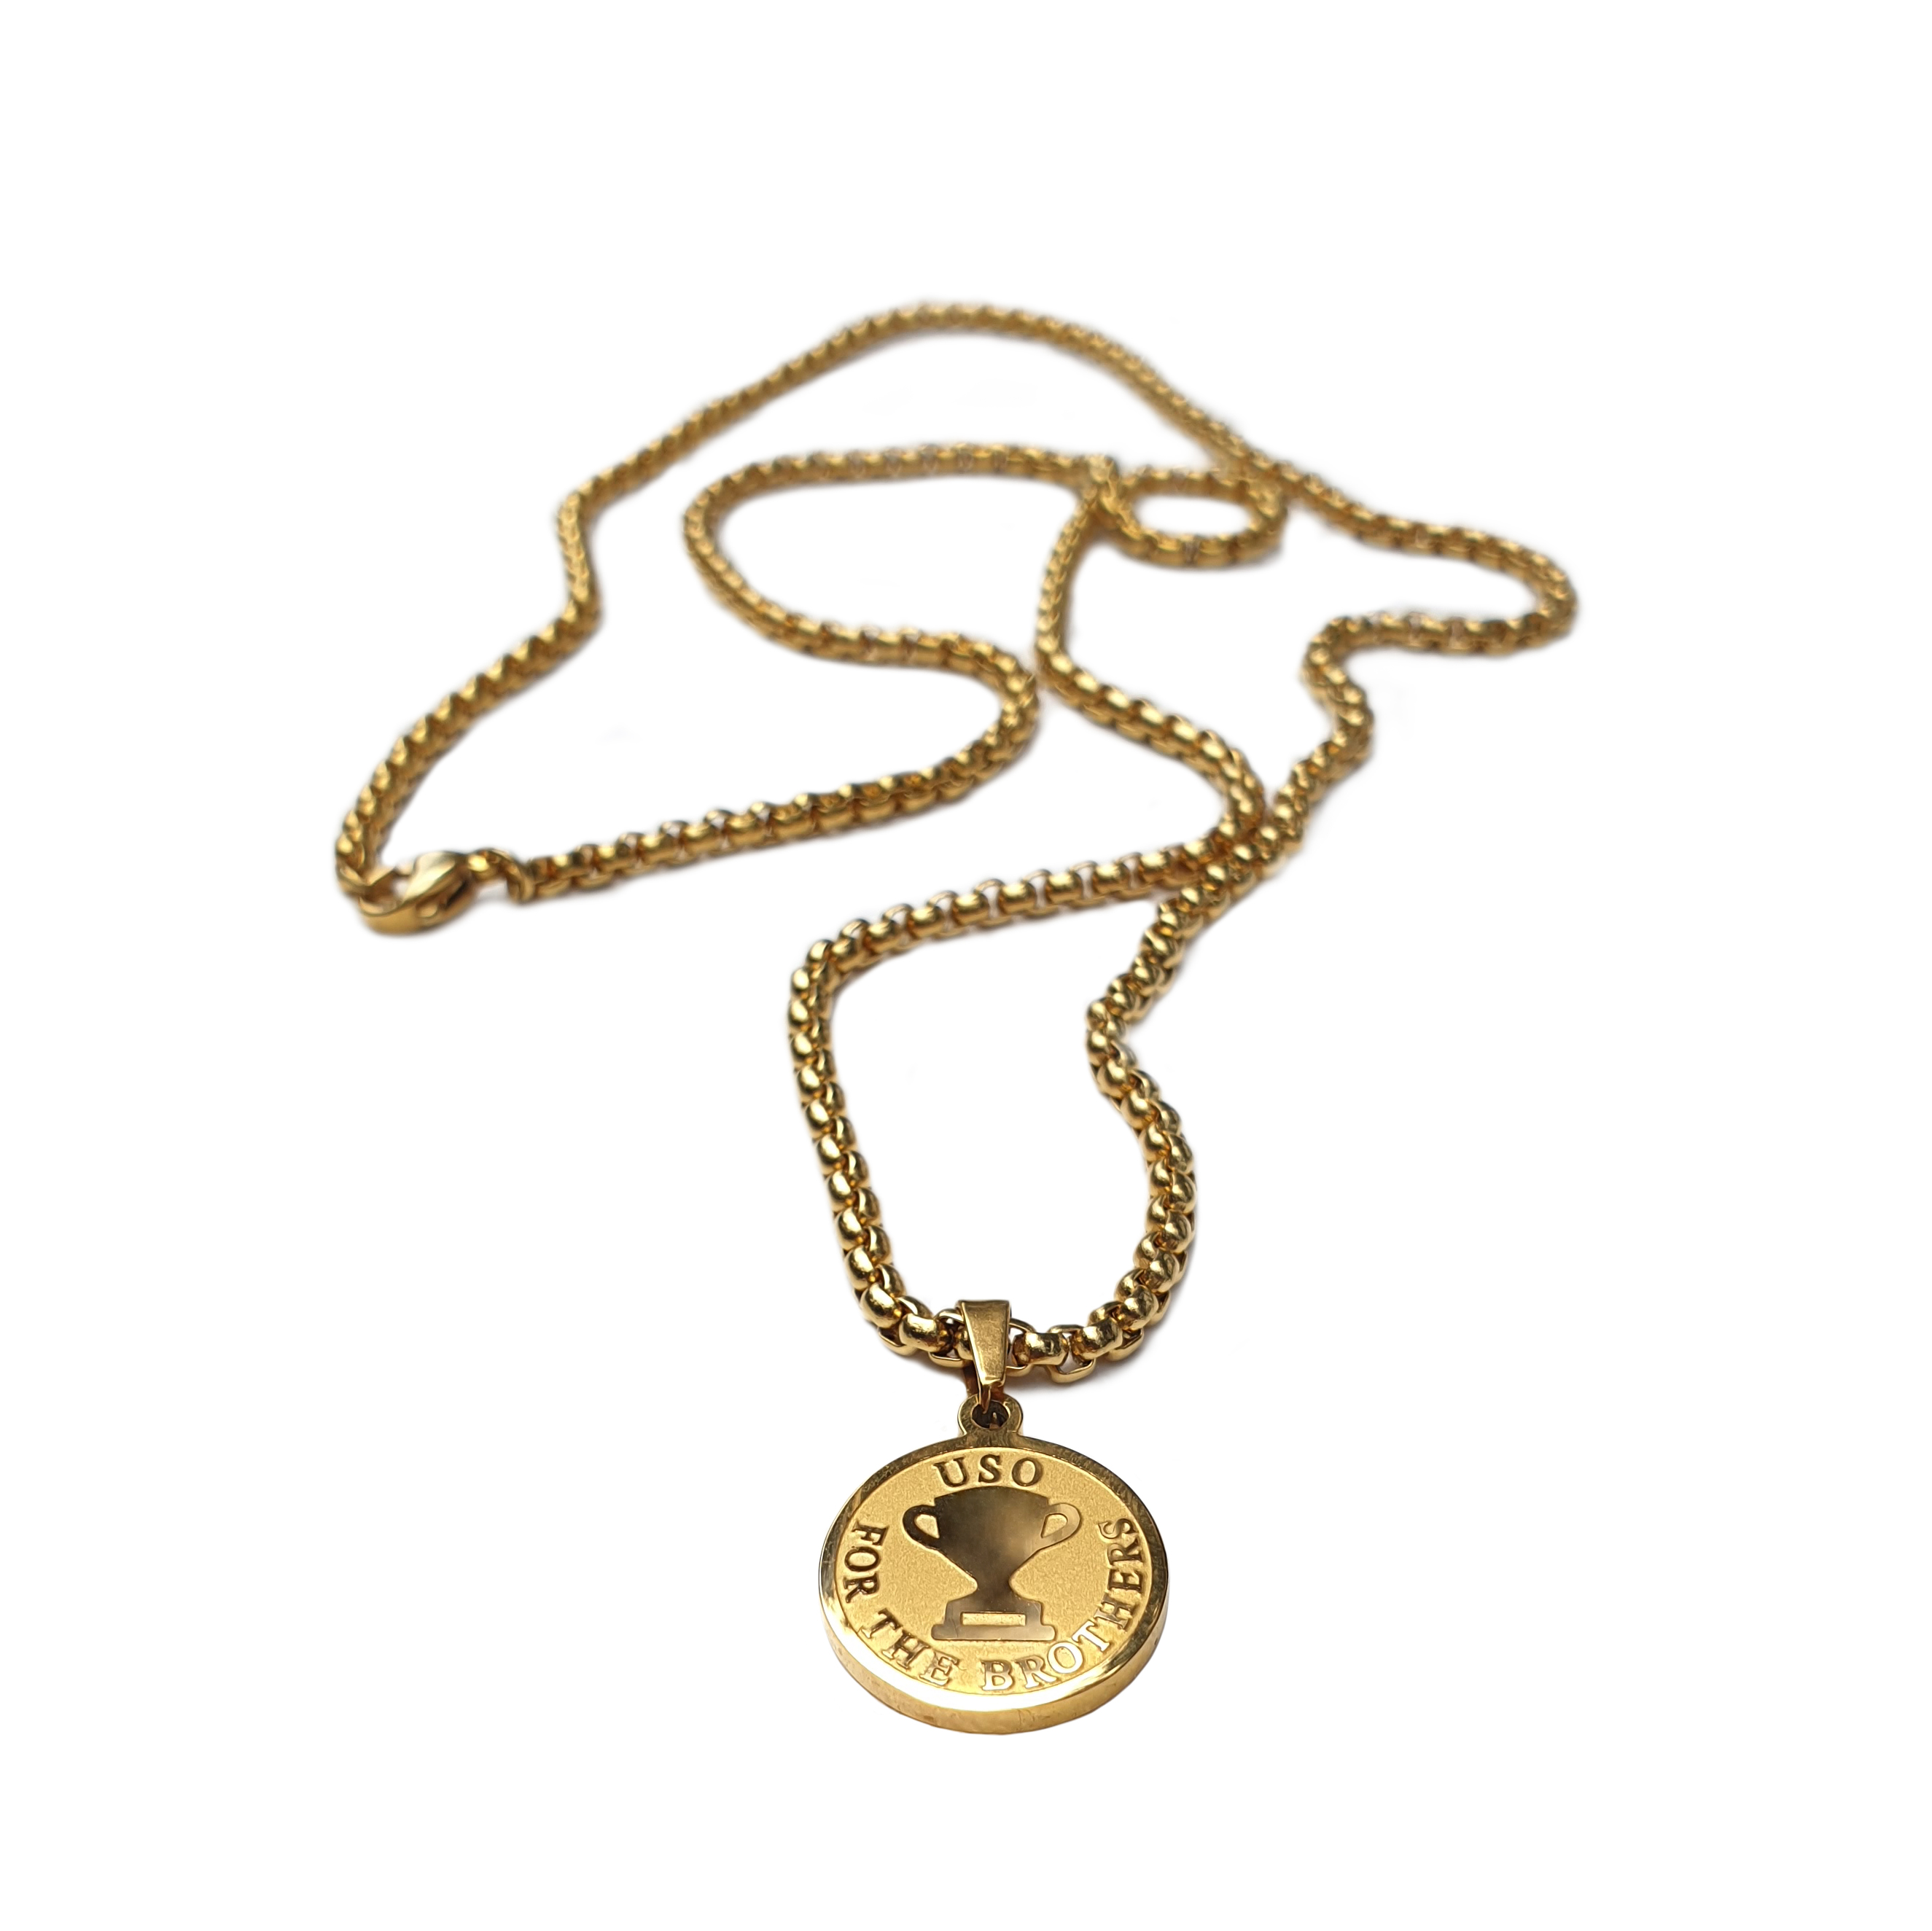 Gold/Silver Necklace - USO